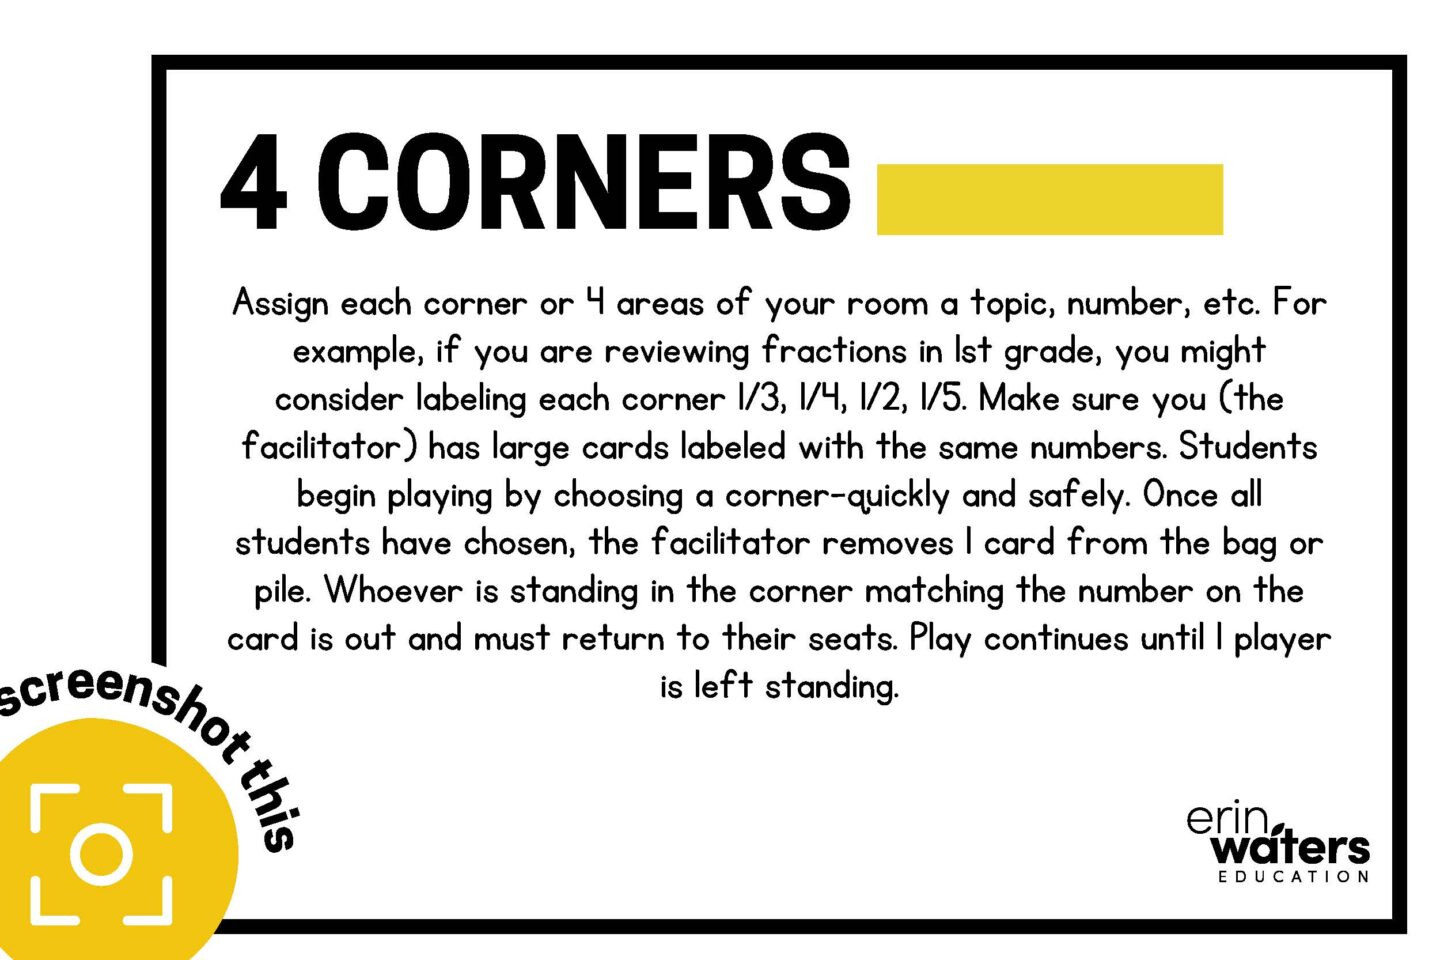 classroom math games for 6th graders example #1 - 4 Corners. A slide showing the rules and a prompt to "screenshot this" in the left lower corner.